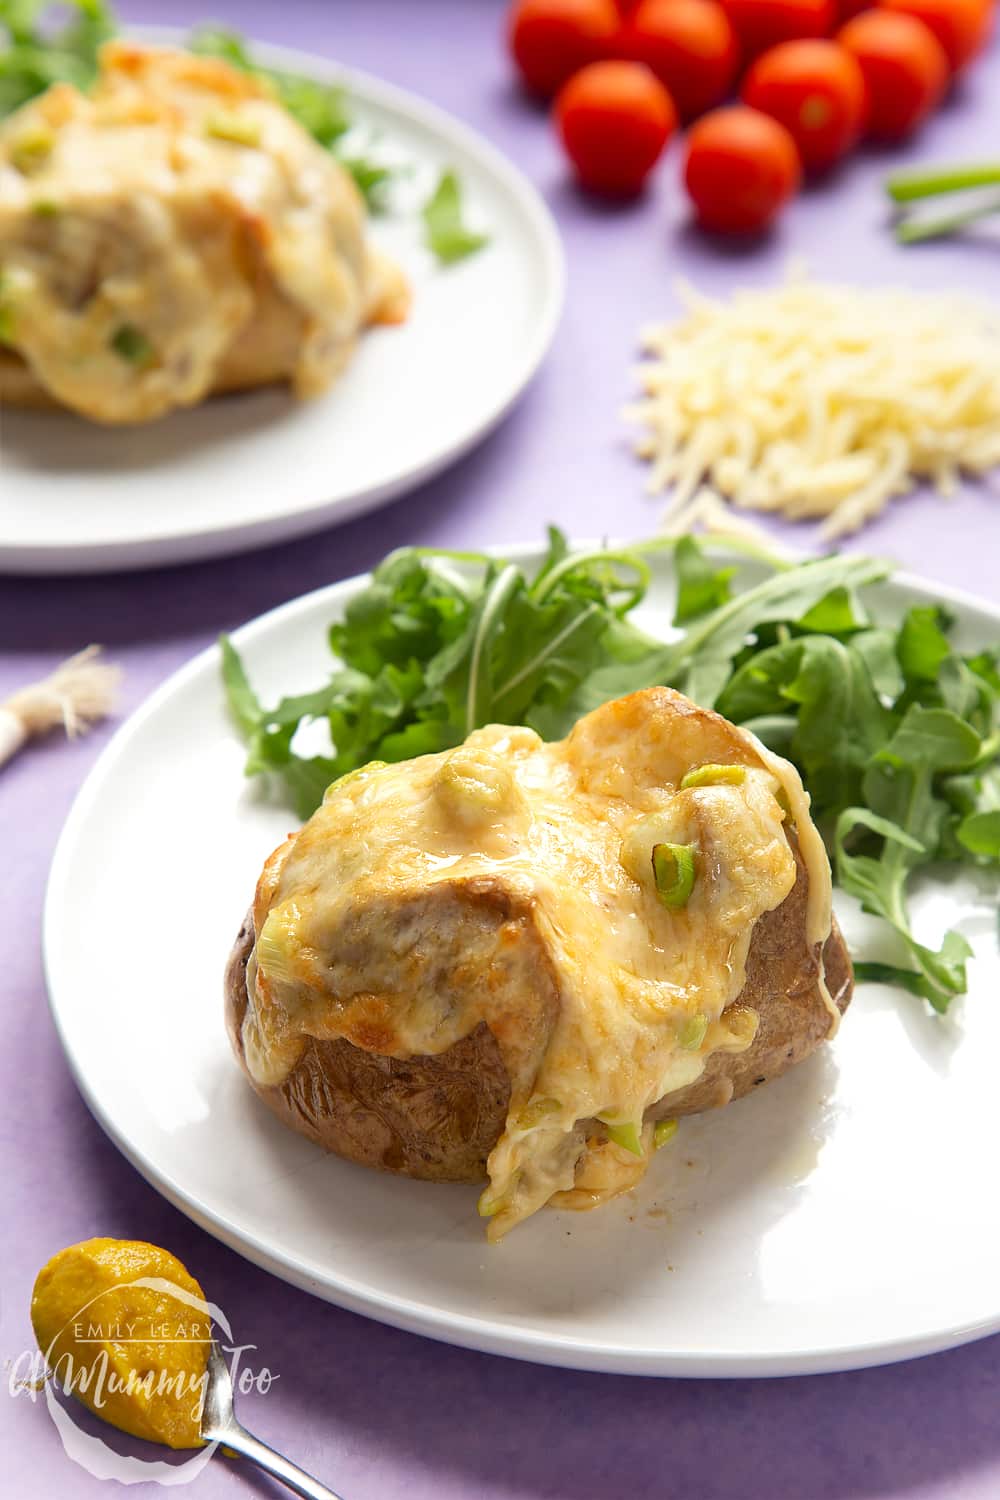 A cheese and onion jacket potato served on a white plate with rocket. The cheesy topping is dripping down the sides of the potato.